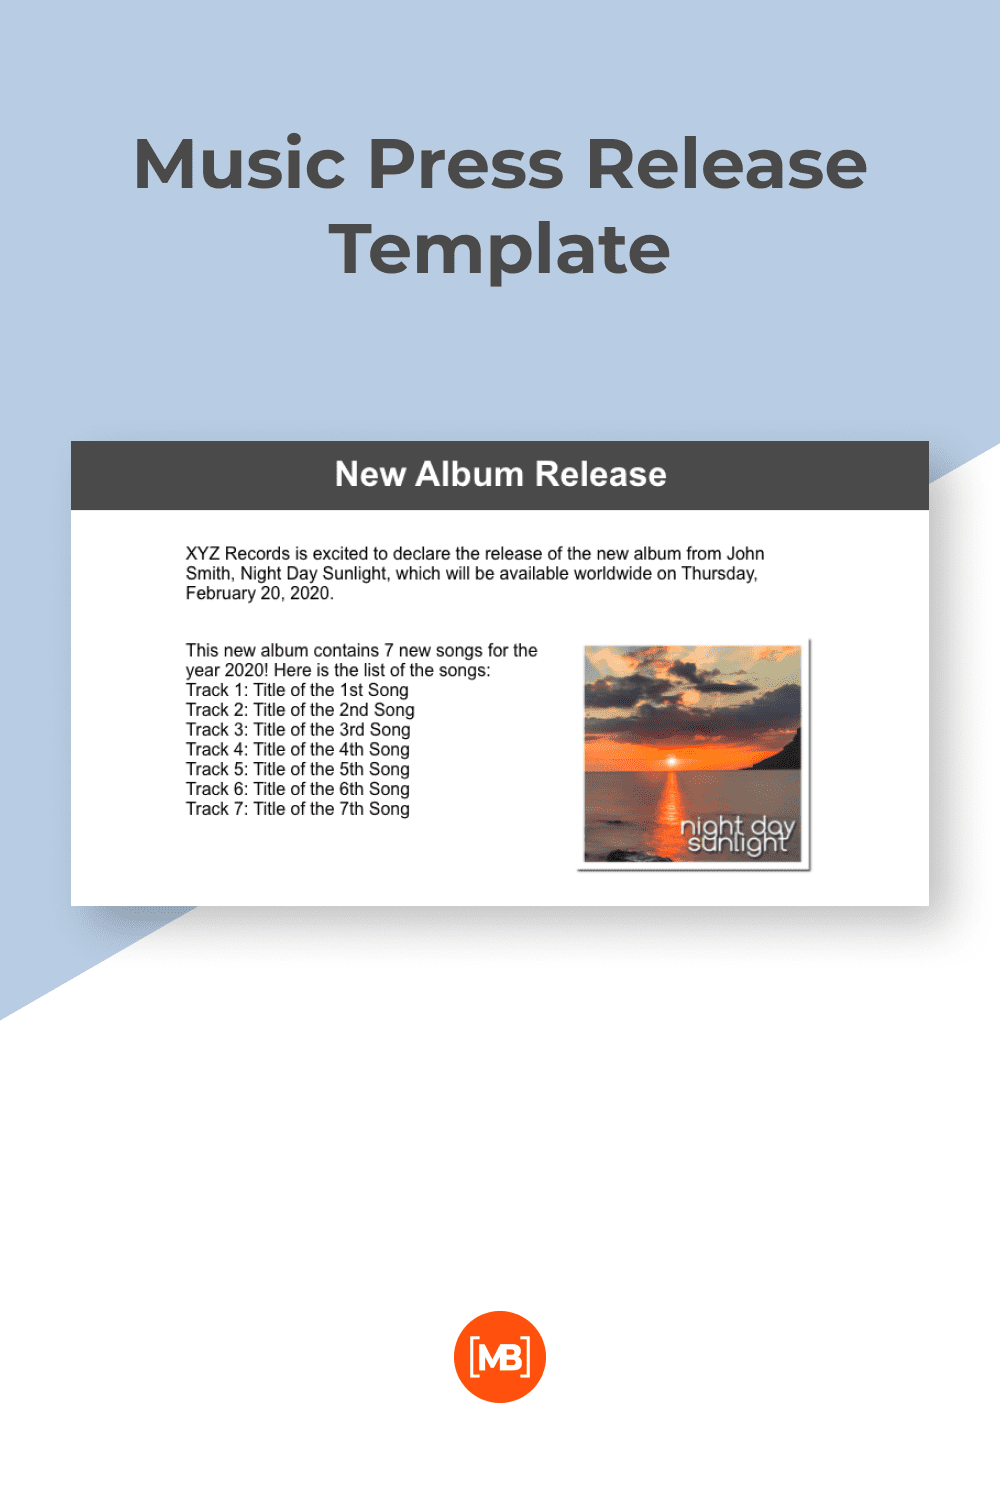 The press release was created in a classic format - space for text and photos.